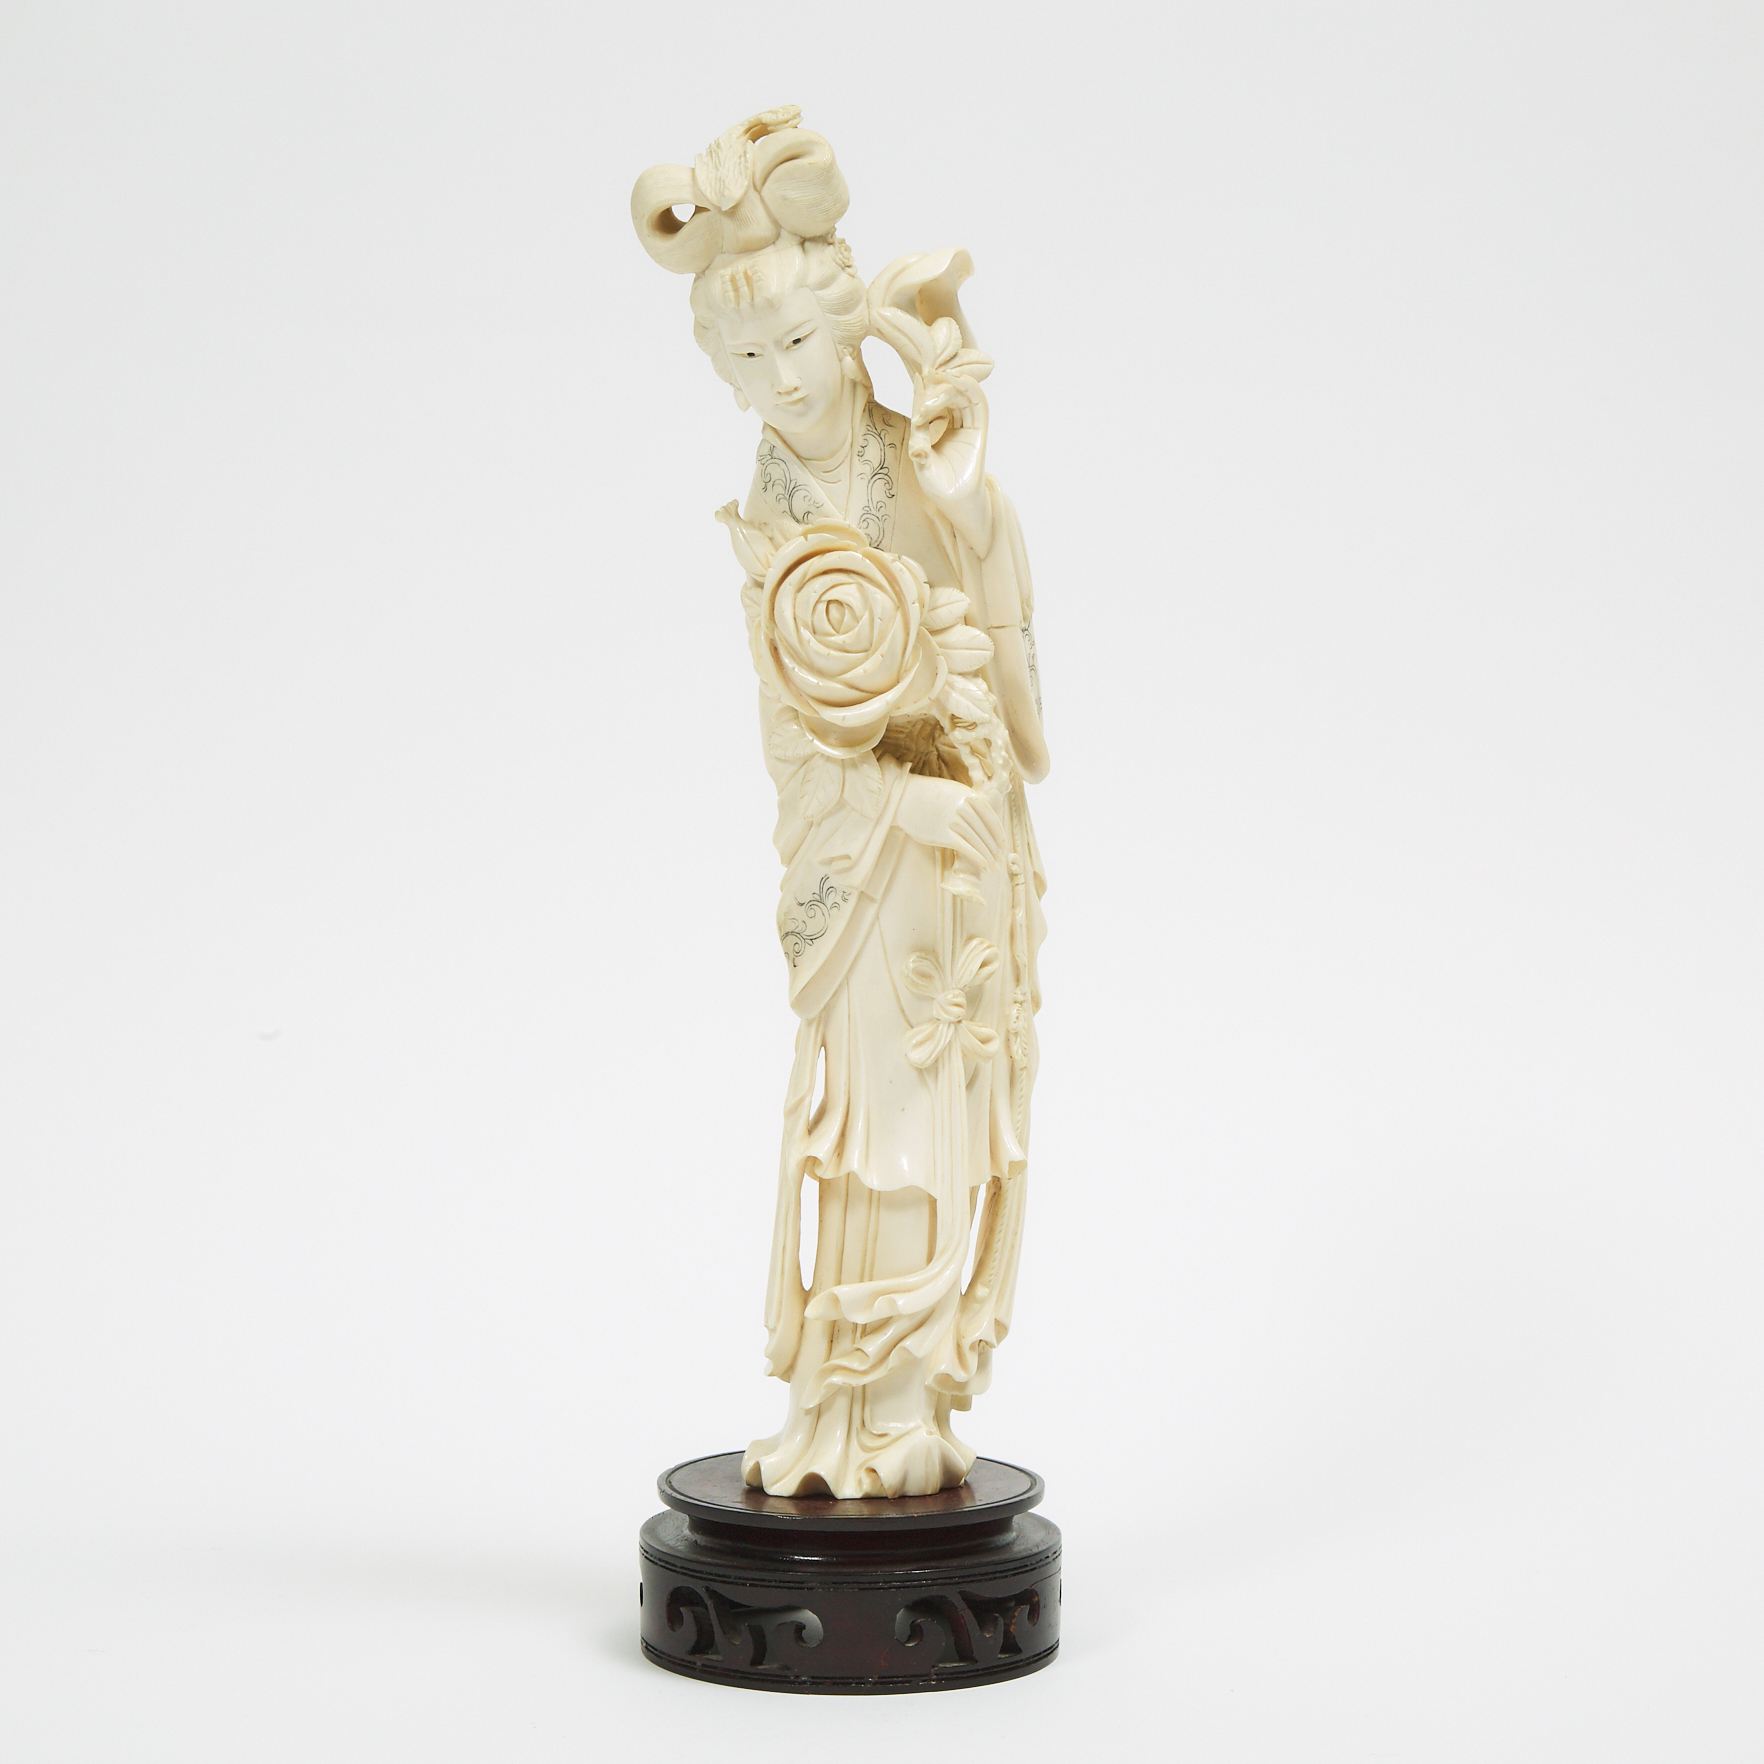 An Ivory Figure of a Lady Holding a Peony Flower, Republican Period